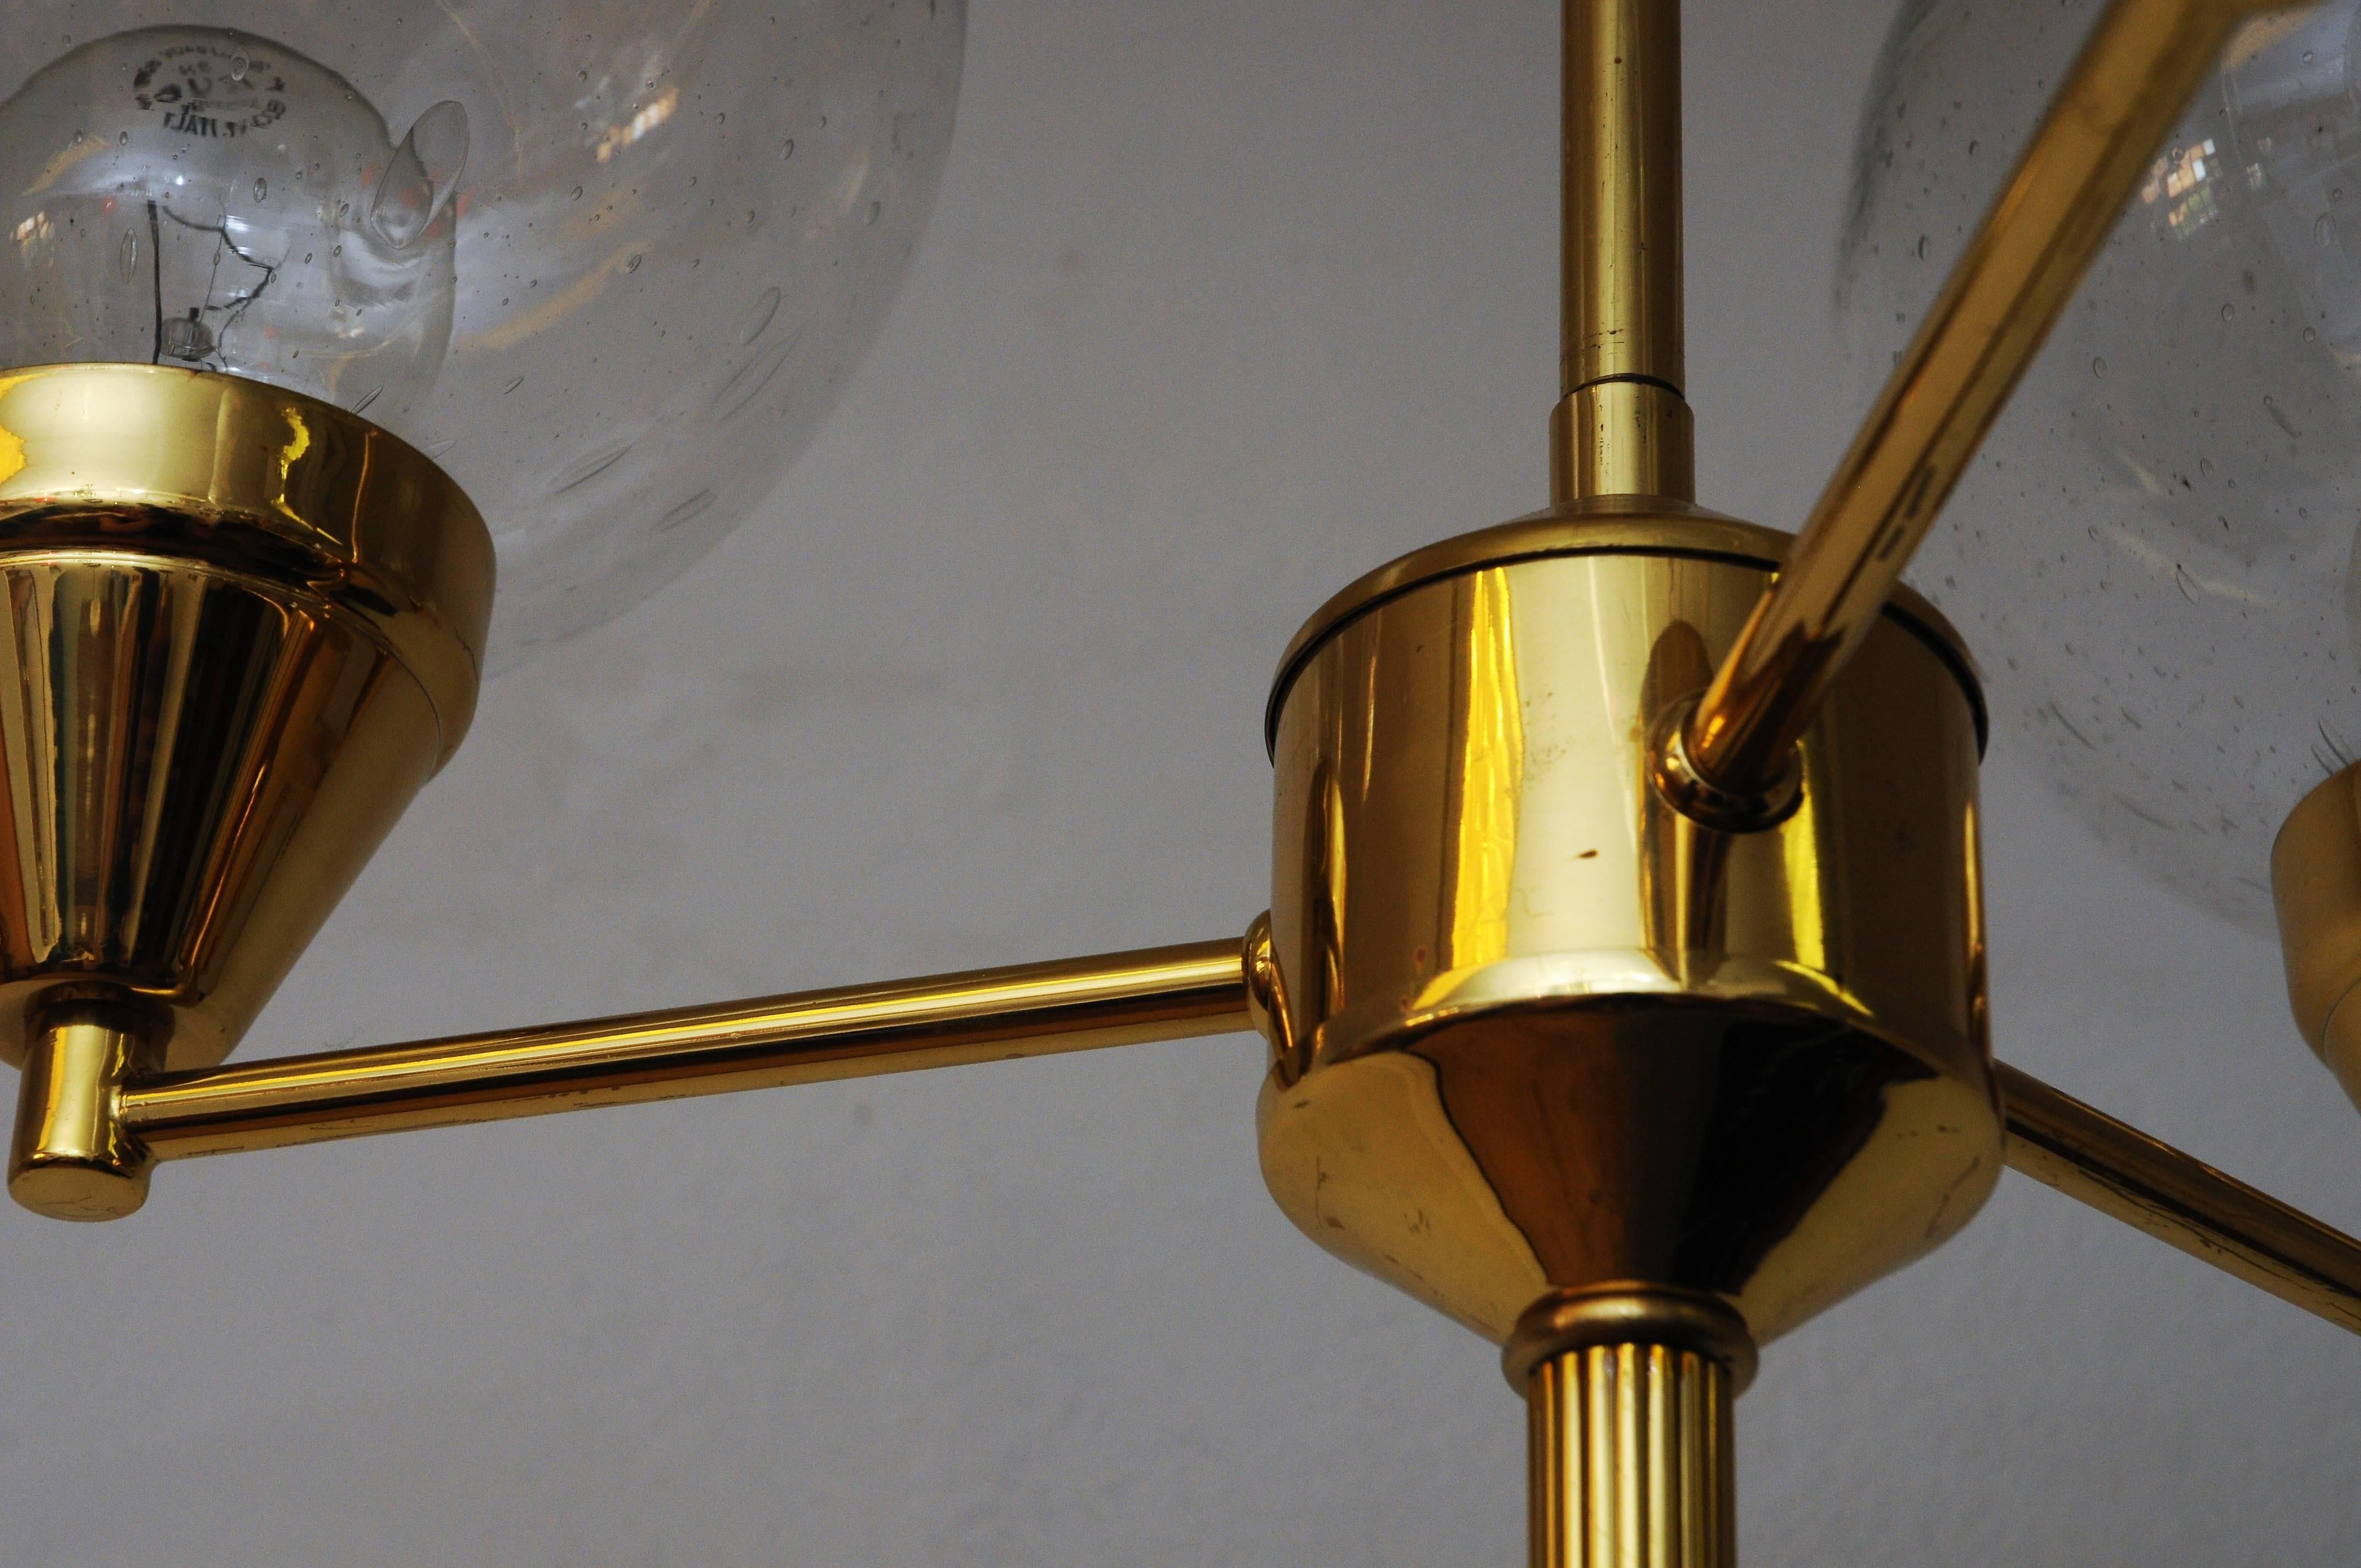 Mid-20th Century Brass Ceiling Lamp with Three Clear Glass Domes 1960`s - Sweden